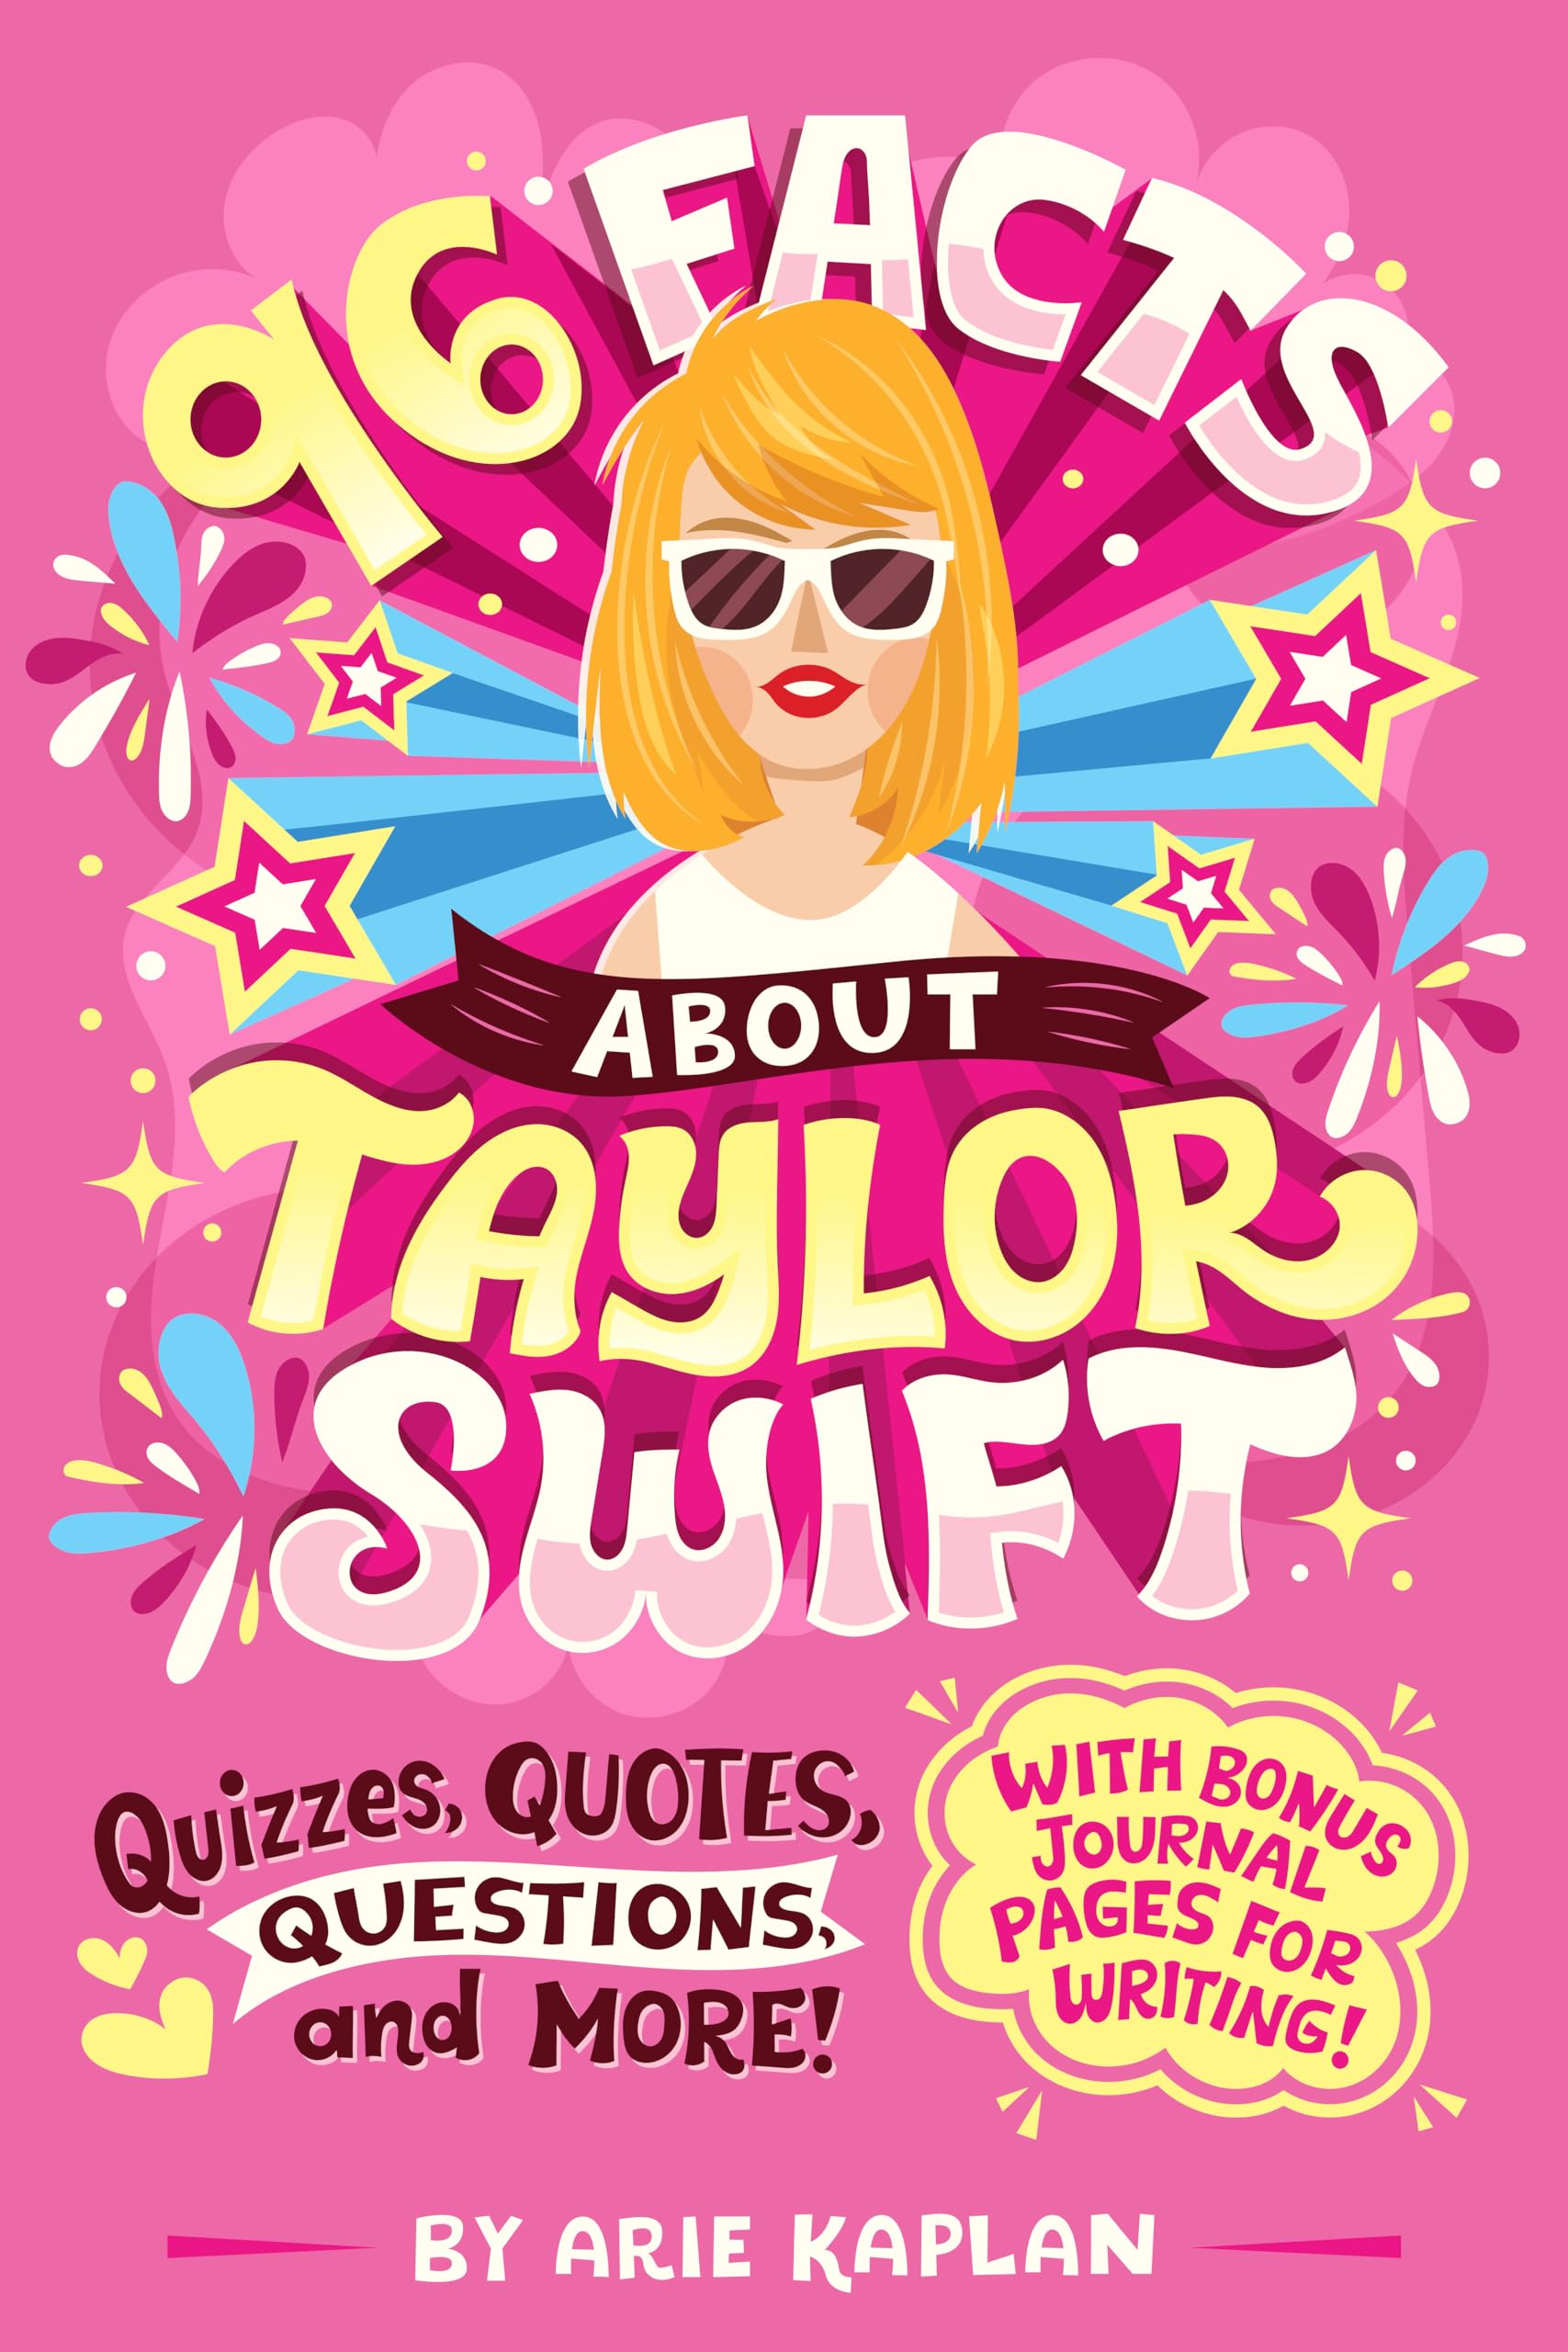 96 Facts About Taylor Swift: Quizzes, Quotes, Questions, and More! With Bonus Journal Pages for Writing! by Kaplan, Arie